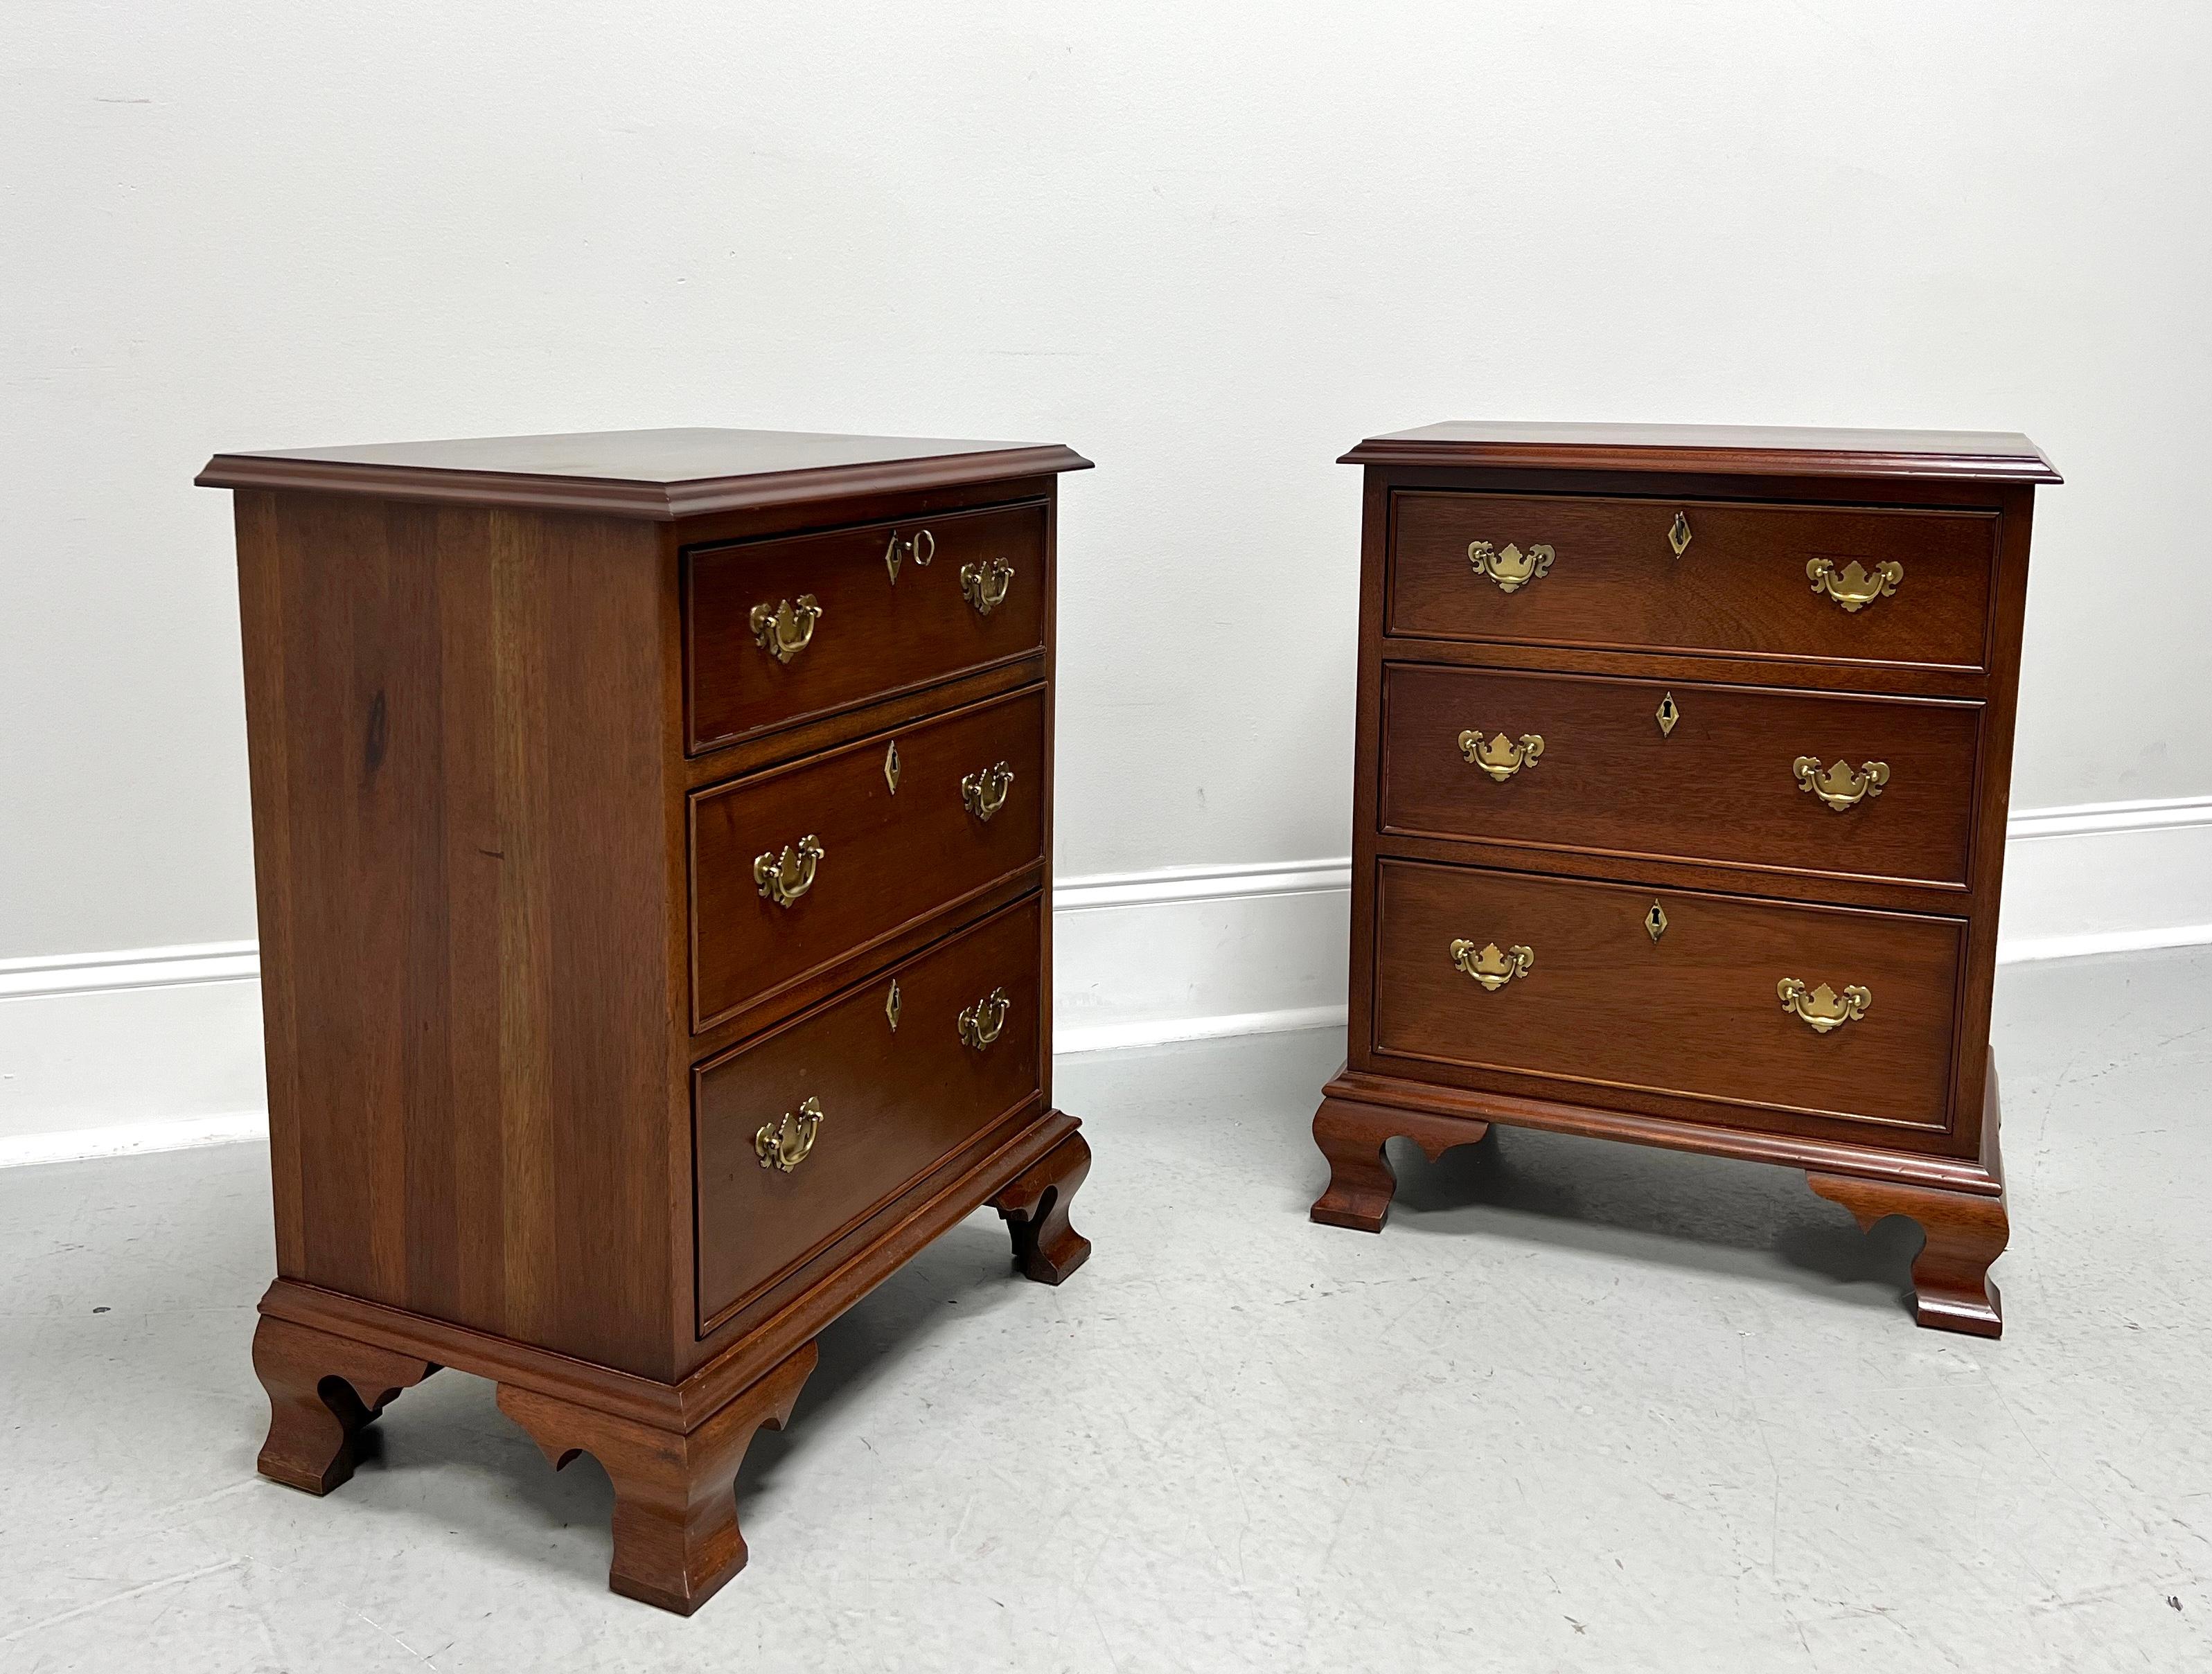 CRAFTIQUE Solid Mahogany Chippendale Style Three-Drawer Nightstands - Pair In Good Condition For Sale In Charlotte, NC